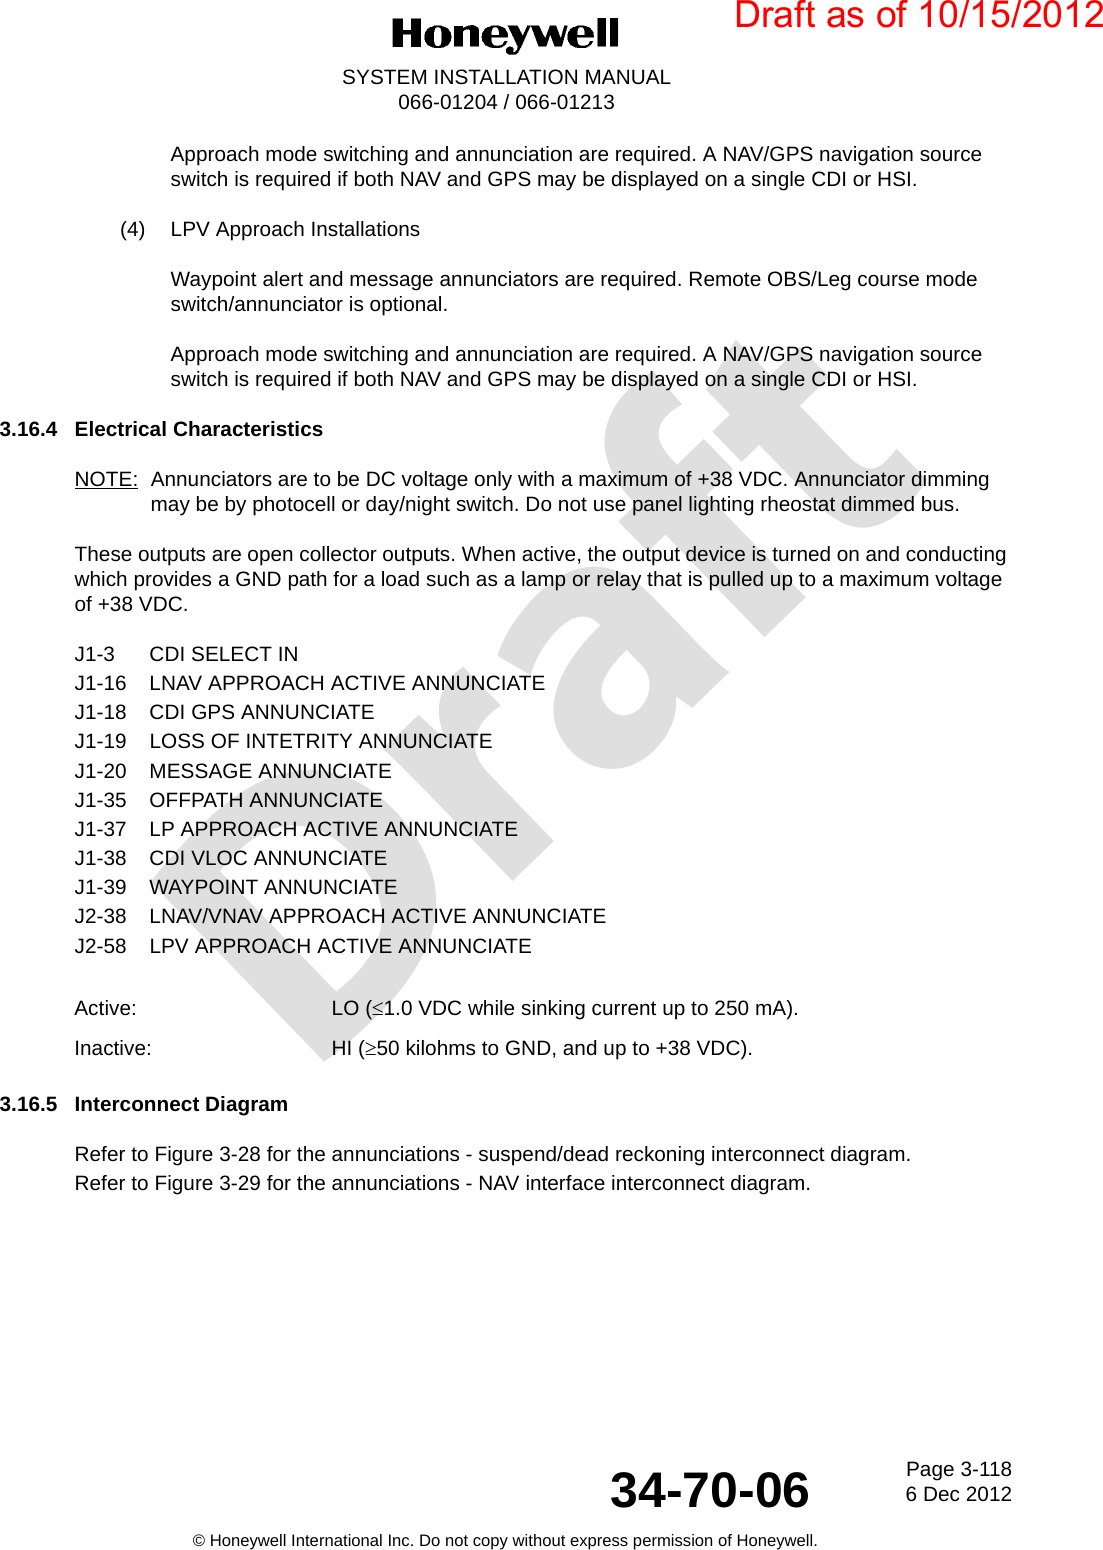 DraftPage 3-1186 Dec 201234-70-06SYSTEM INSTALLATION MANUAL066-01204 / 066-01213© Honeywell International Inc. Do not copy without express permission of Honeywell.Approach mode switching and annunciation are required. A NAV/GPS navigation source switch is required if both NAV and GPS may be displayed on a single CDI or HSI.(4) LPV Approach InstallationsWaypoint alert and message annunciators are required. Remote OBS/Leg course mode switch/annunciator is optional.Approach mode switching and annunciation are required. A NAV/GPS navigation source switch is required if both NAV and GPS may be displayed on a single CDI or HSI.3.16.4 Electrical CharacteristicsNOTE: Annunciators are to be DC voltage only with a maximum of +38 VDC. Annunciator dimming may be by photocell or day/night switch. Do not use panel lighting rheostat dimmed bus.These outputs are open collector outputs. When active, the output device is turned on and conducting which provides a GND path for a load such as a lamp or relay that is pulled up to a maximum voltage of +38 VDC.J1-3 CDI SELECT INJ1-16 LNAV APPROACH ACTIVE ANNUNCIATEJ1-18 CDI GPS ANNUNCIATEJ1-19 LOSS OF INTETRITY ANNUNCIATEJ1-20 MESSAGE ANNUNCIATEJ1-35 OFFPATH ANNUNCIATEJ1-37 LP APPROACH ACTIVE ANNUNCIATEJ1-38 CDI VLOC ANNUNCIATEJ1-39 WAYPOINT ANNUNCIATEJ2-38 LNAV/VNAV APPROACH ACTIVE ANNUNCIATEJ2-58 LPV APPROACH ACTIVE ANNUNCIATE3.16.5 Interconnect DiagramRefer to Figure 3-28 for the annunciations - suspend/dead reckoning interconnect diagram.Refer to Figure 3-29 for the annunciations - NAV interface interconnect diagram.Active: LO (1.0 VDC while sinking current up to 250 mA). Inactive: HI (50 kilohms to GND, and up to +38 VDC).Draft as of 10/15/2012